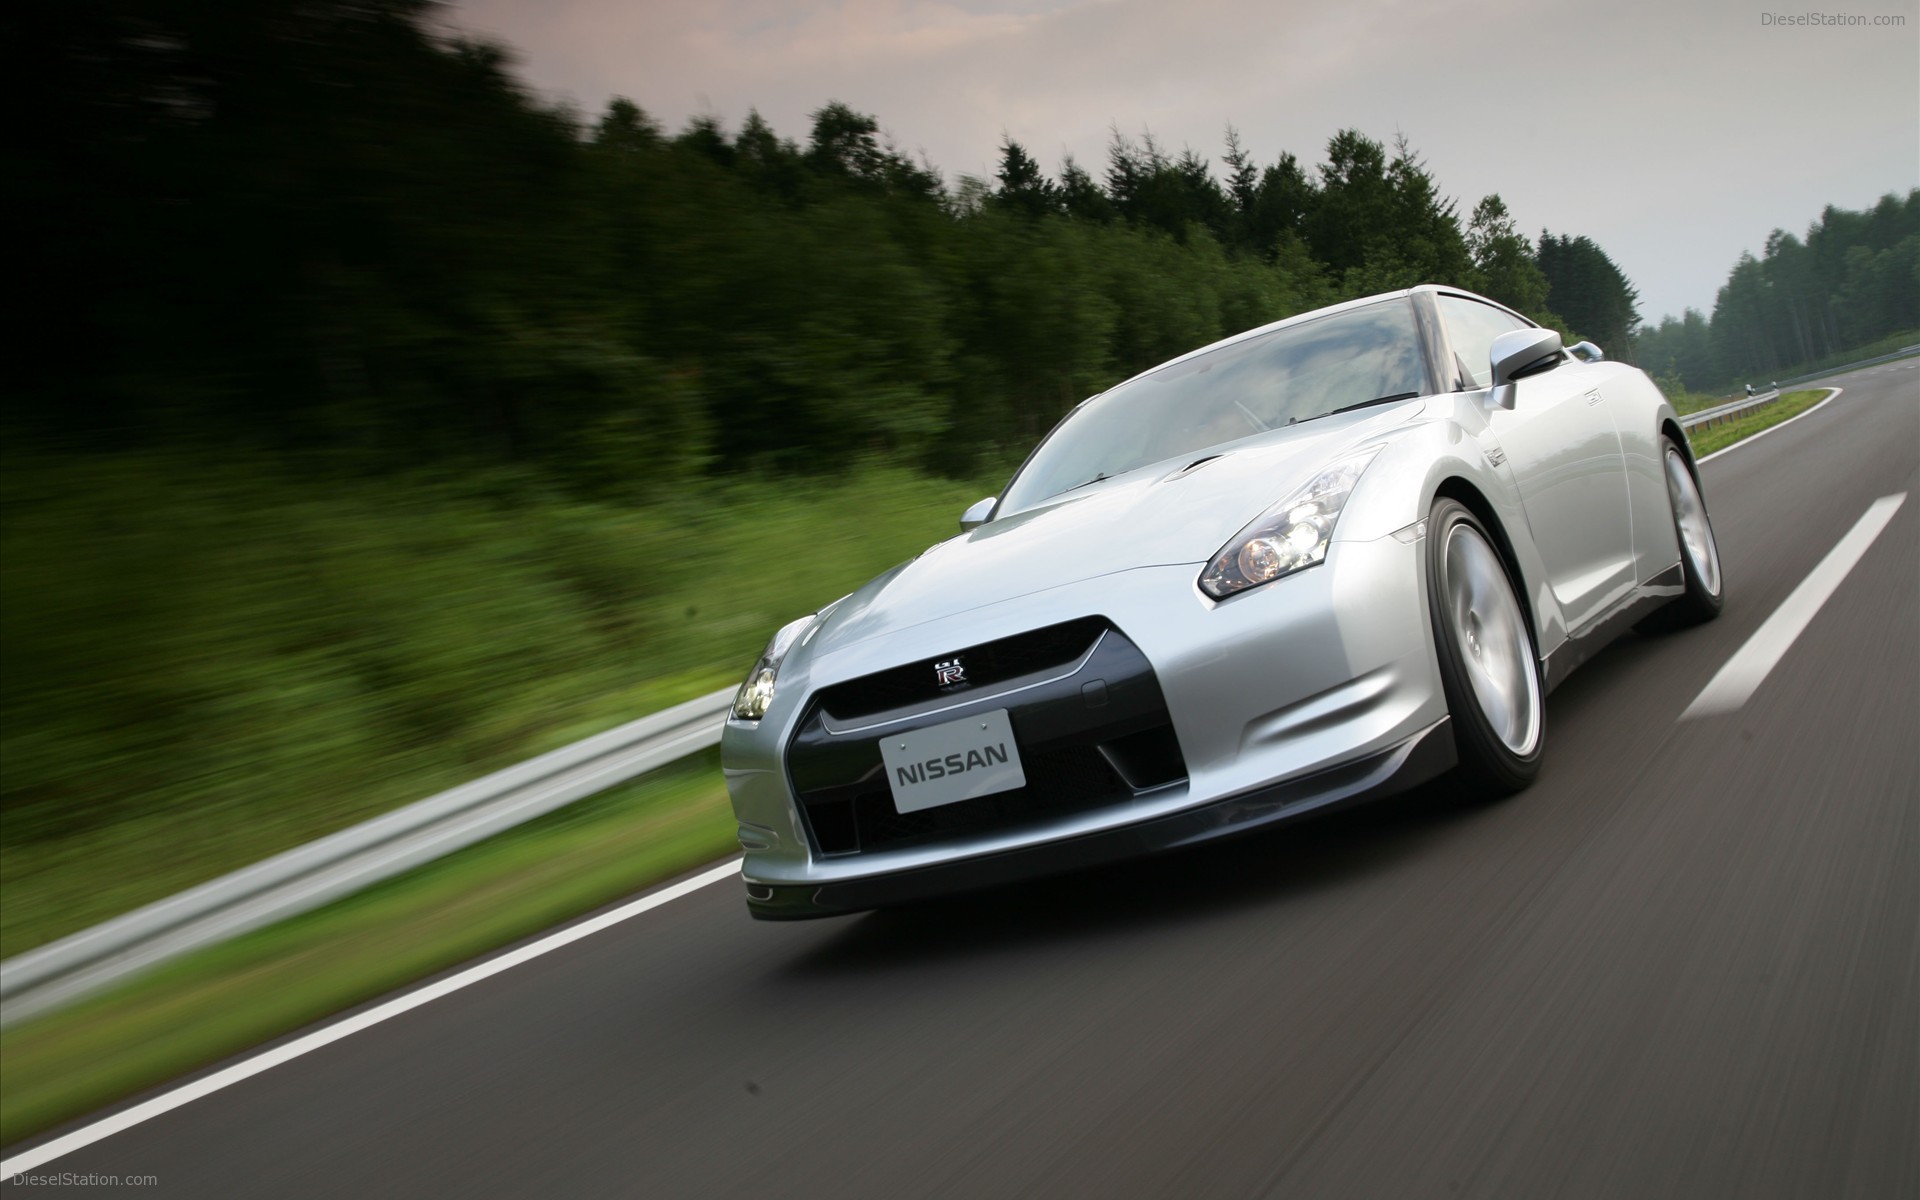 Nissan Gt R Widescreen Exotic Car Picture Of